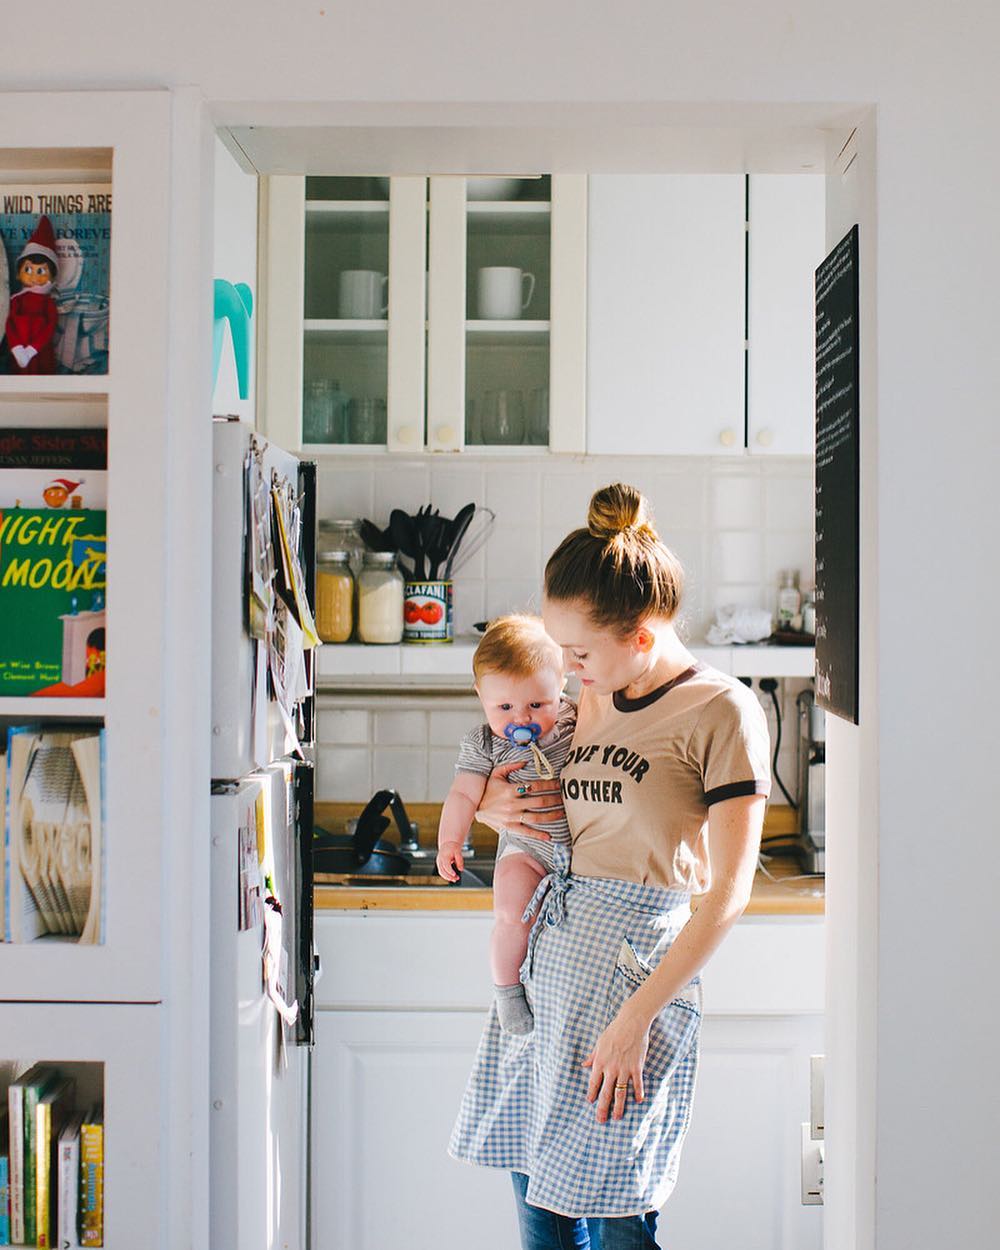 Woman Holding Her Baby Inside Her Apartment Kitchen in Brooklyn. Photo by Instagram user @hailey.marie.andresen